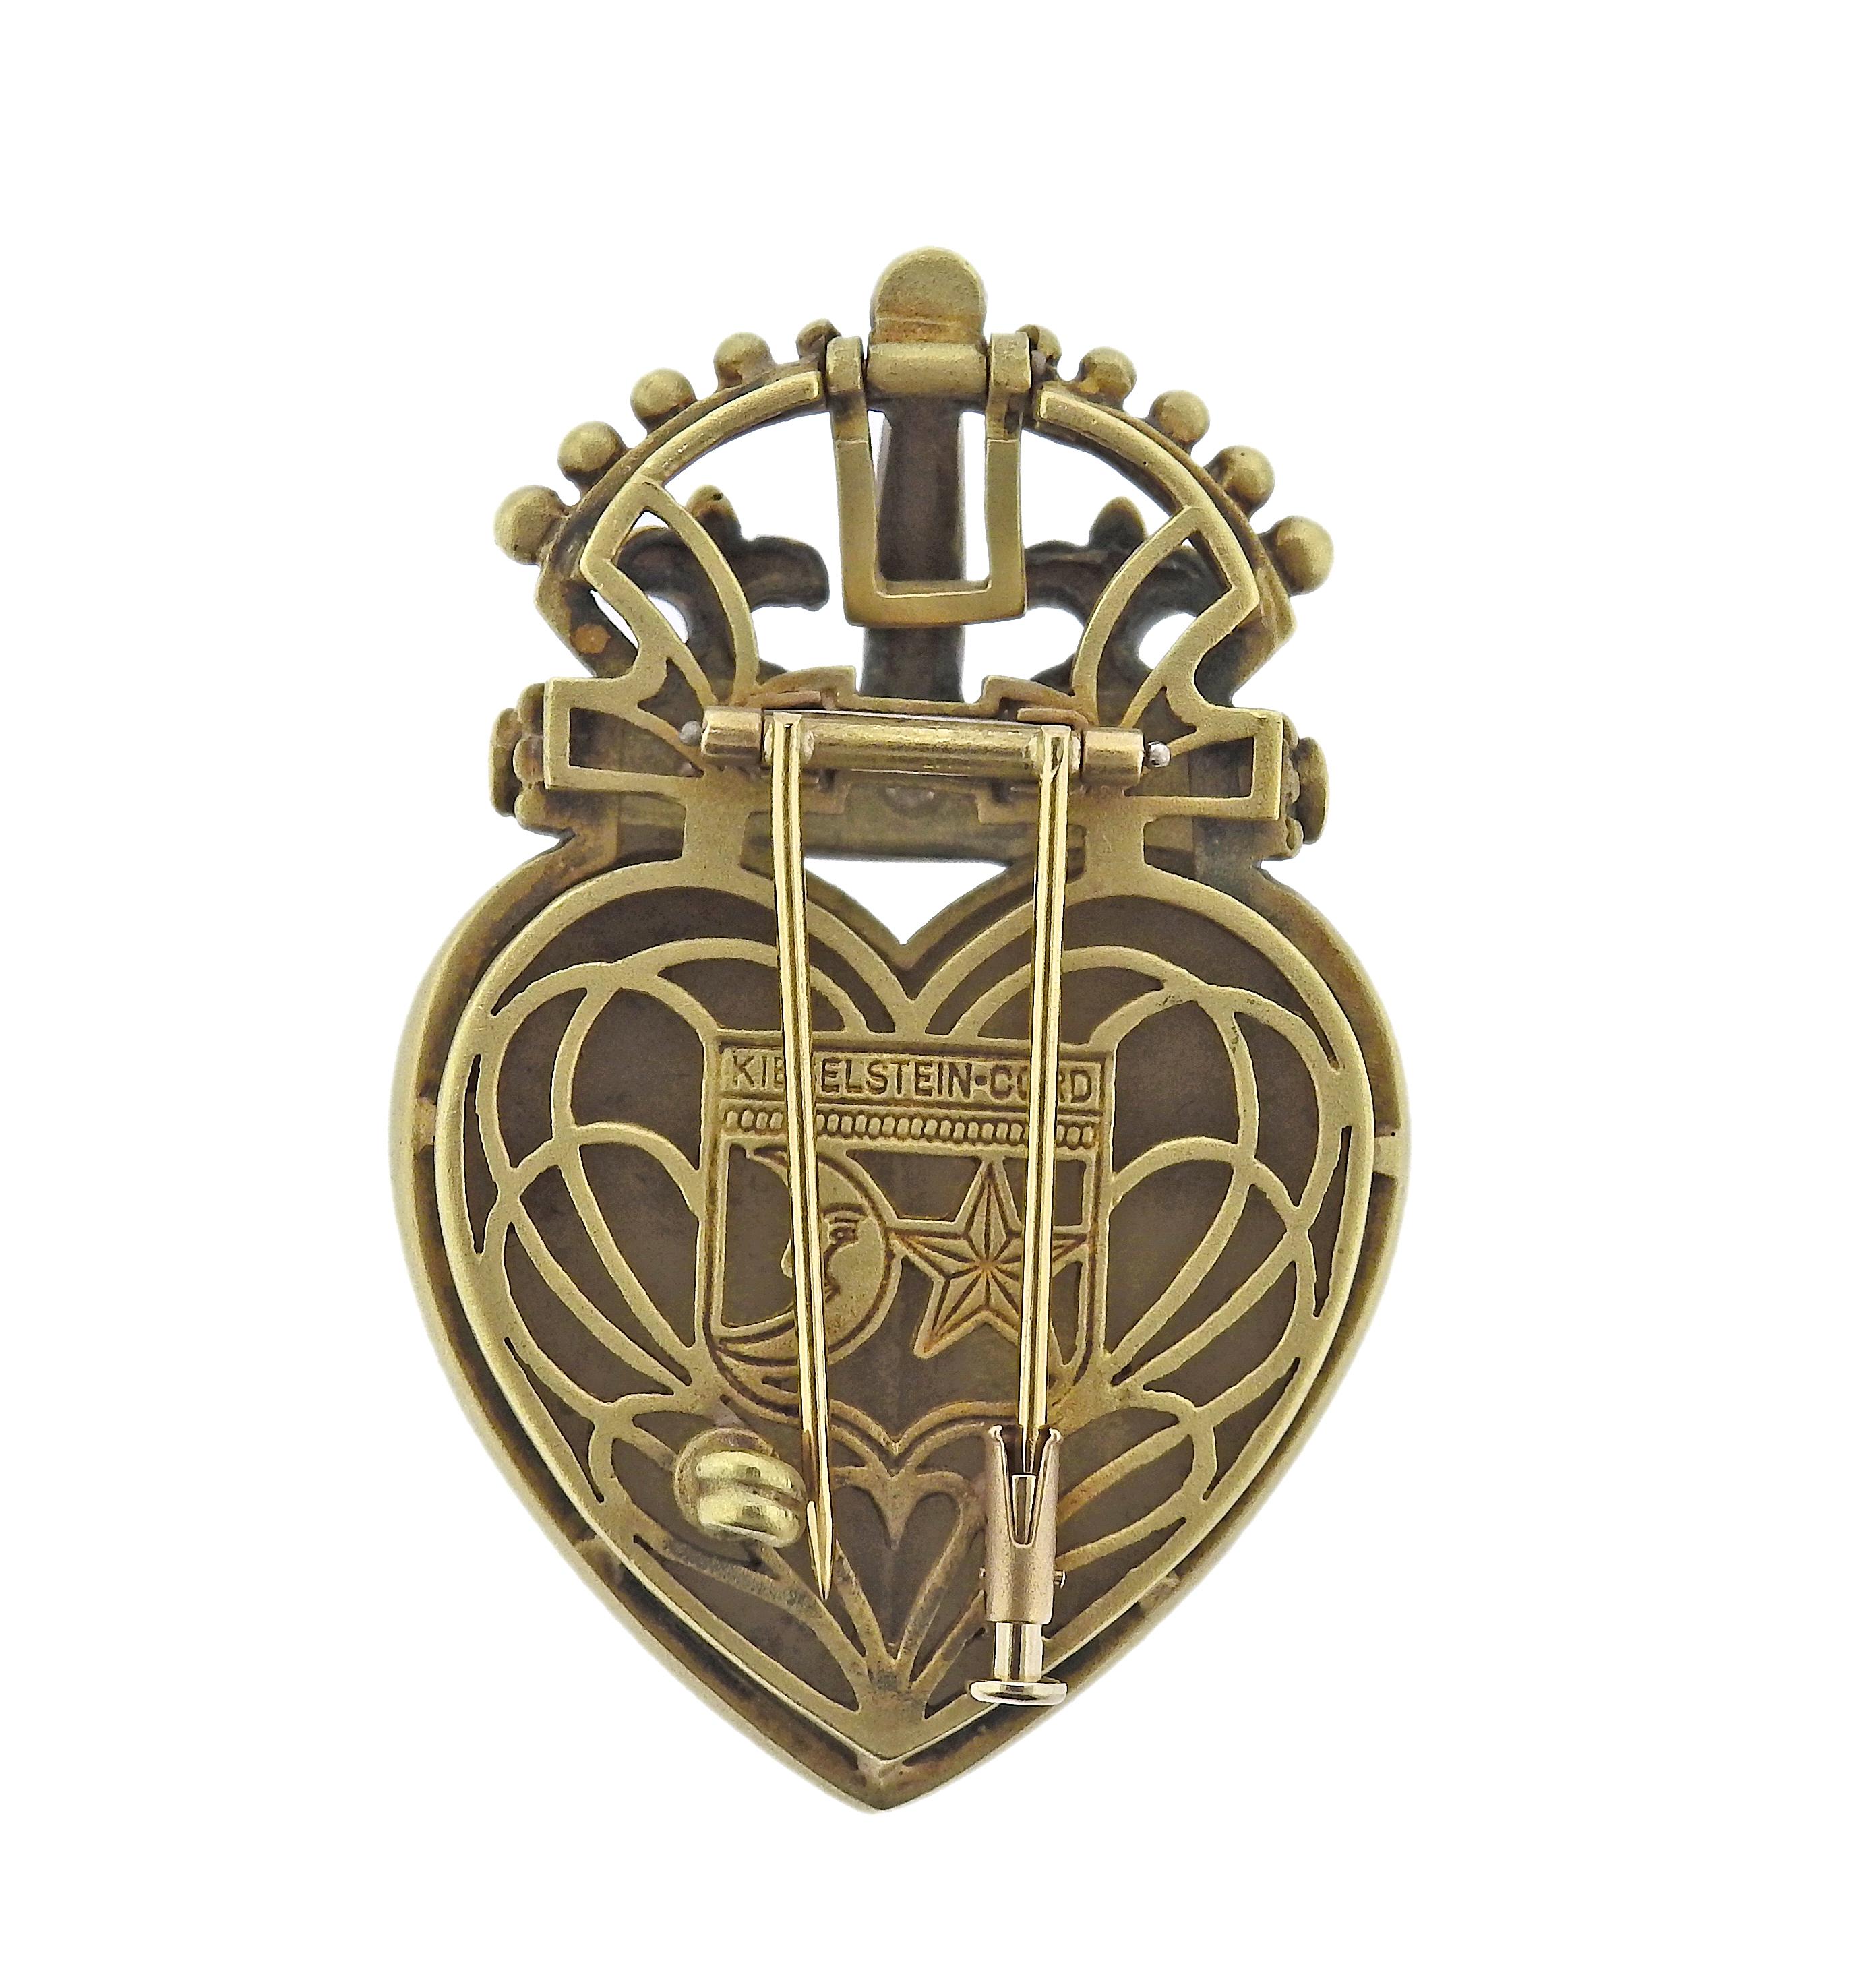 18k gold crown heart brooch pendant, with hidden collapsible bale. Adorned with approx. 0.20ctw in H/VS diamonds. Brooch measures 2